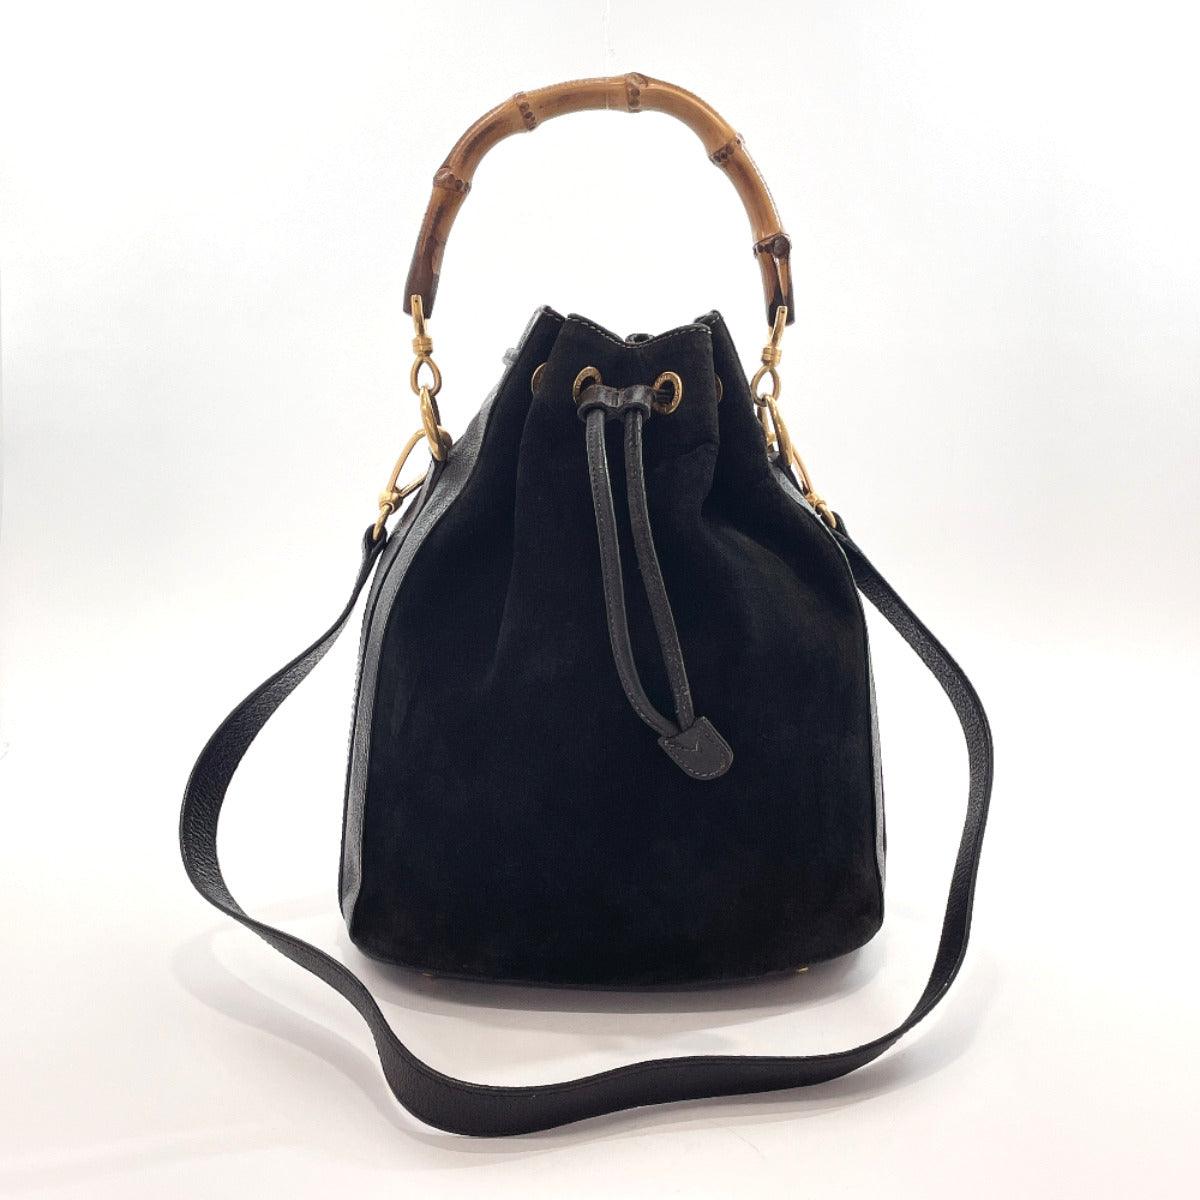 GUCCI Handbag 001・2865・1657 Bamboo Suede/leather Black Women Used –